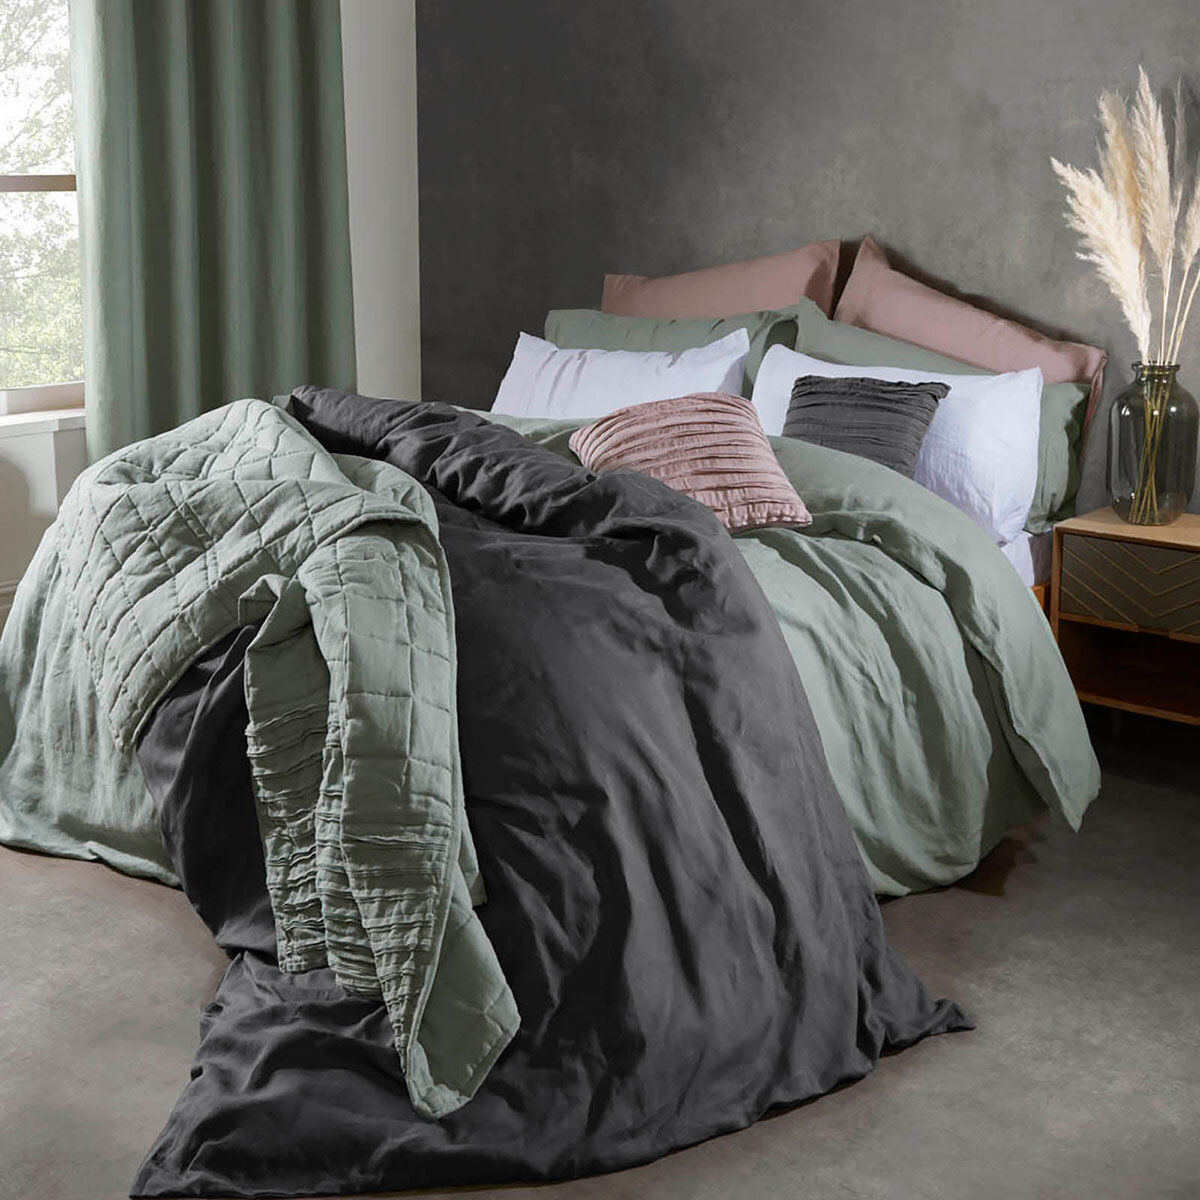 Lazy Linen 100% Washed Linen Charcoal Duvet Cover & Pillowcase Set in 4 Sizes 